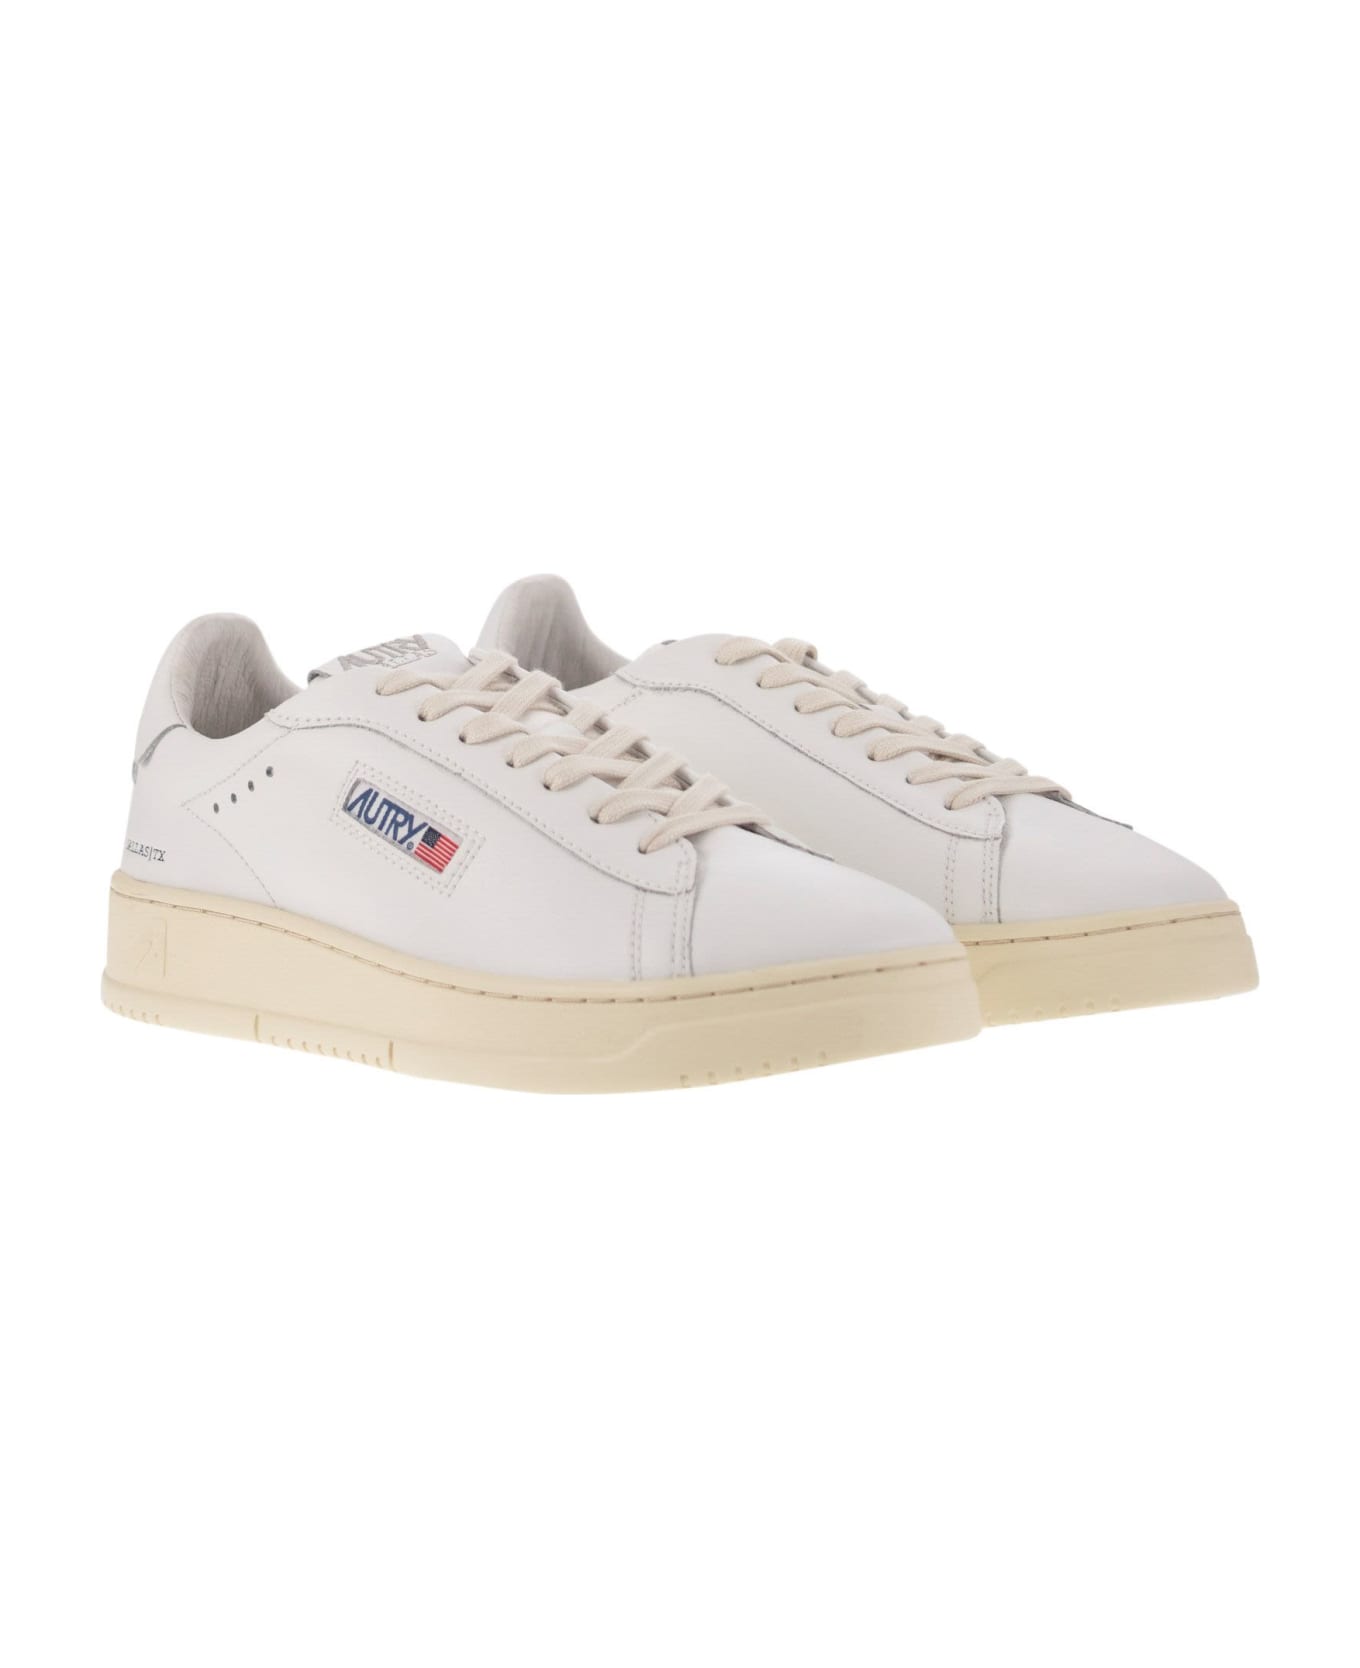 Autry Dallas Low Sneakers In White Leather - White スニーカー